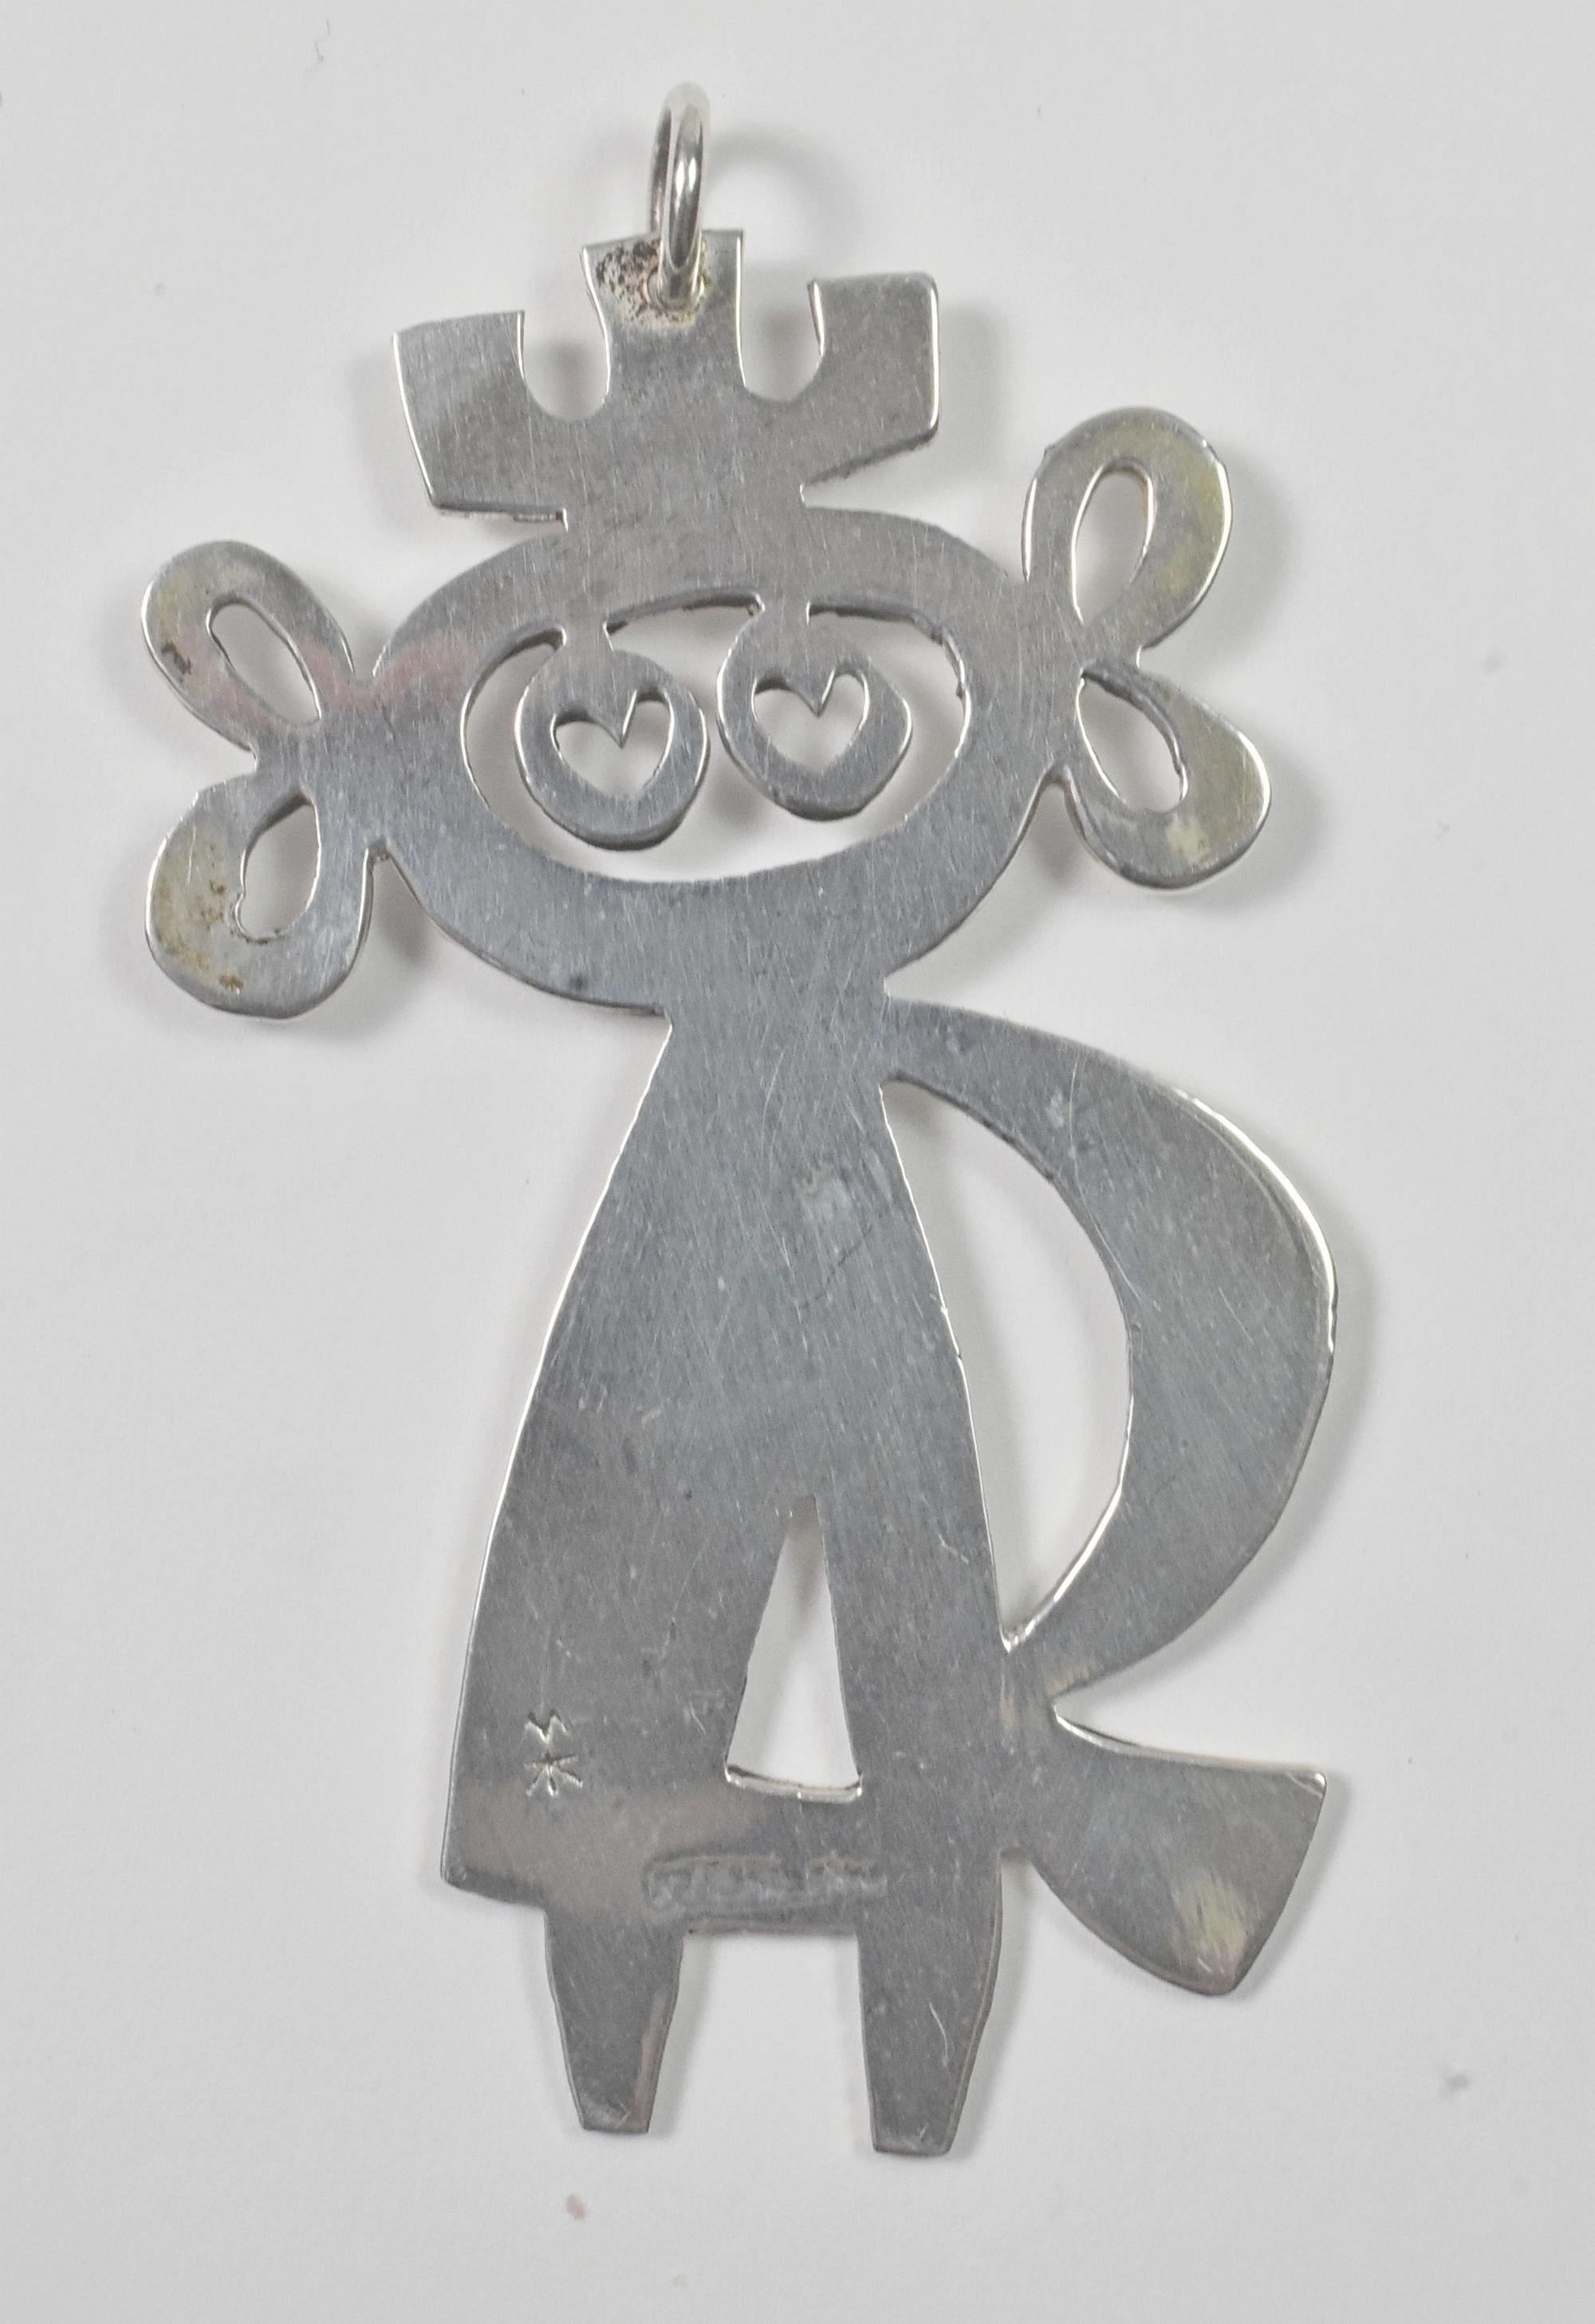 Vintage sterling silver signed EK MIK stousland modernist figural pendant, circa 1960s. MIK Stousland (1920-2002) was an architect, sculptor, and jewelry maker who chaired the architecture department at Miami University in Oxford, Ohio. He usually